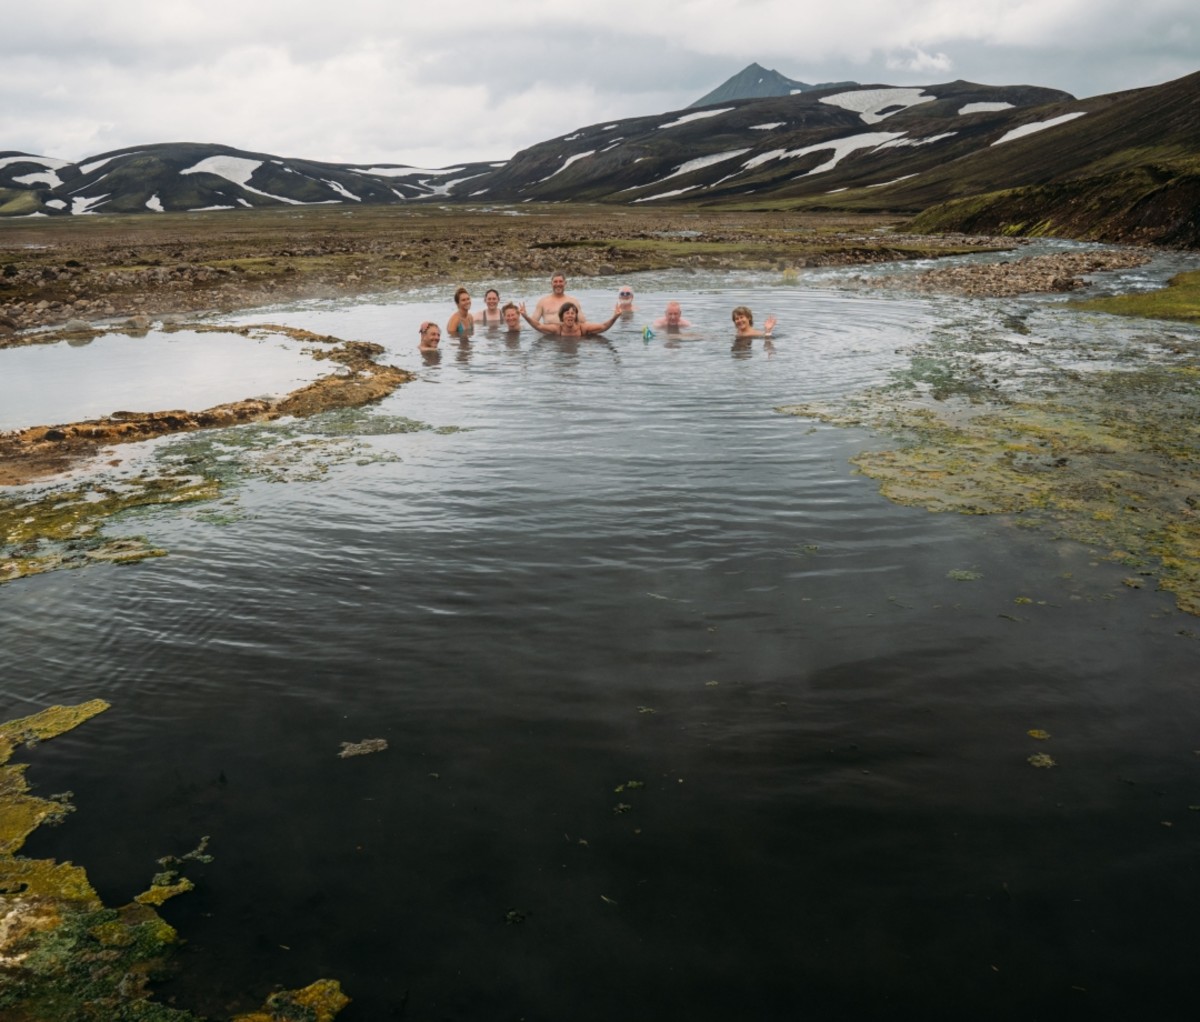 Group of people soaking in a hot spring in Iceland. 57hours